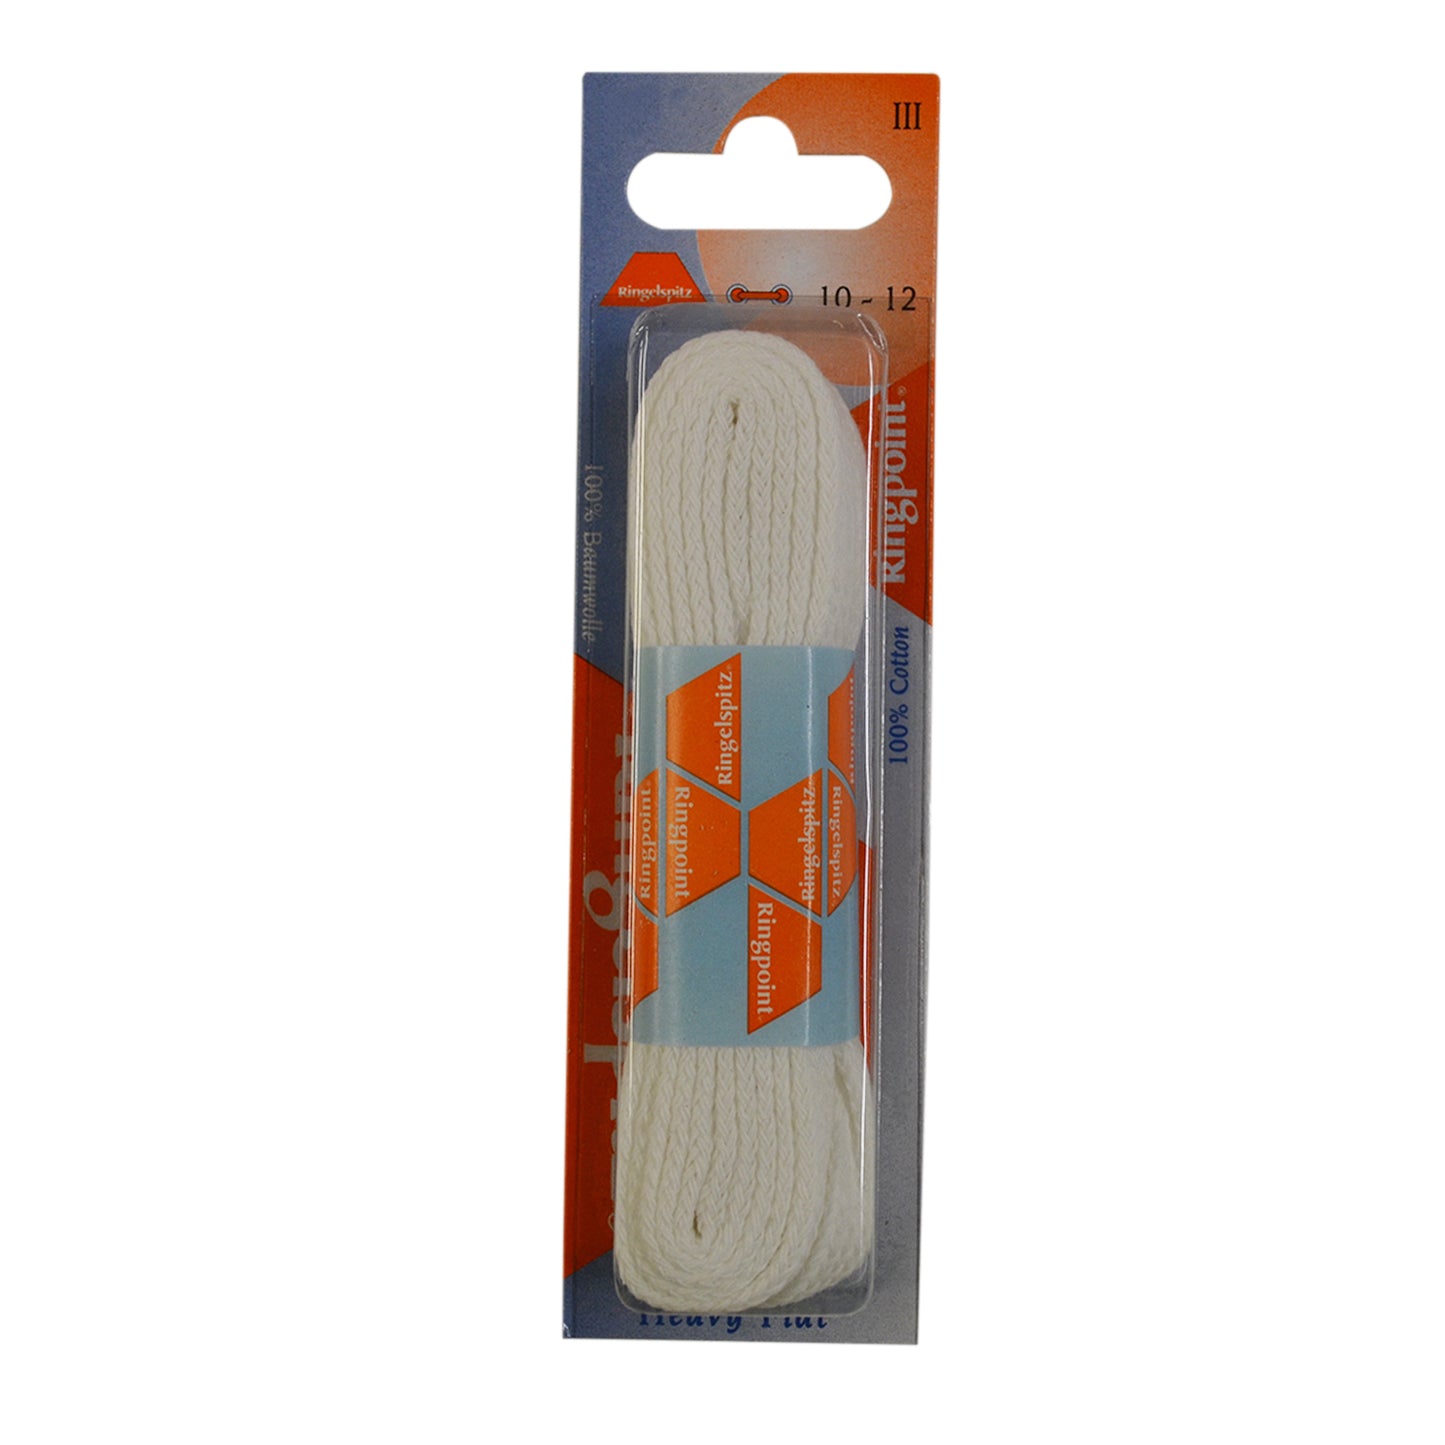 Ringpoint Blister Flat 75cm Laces